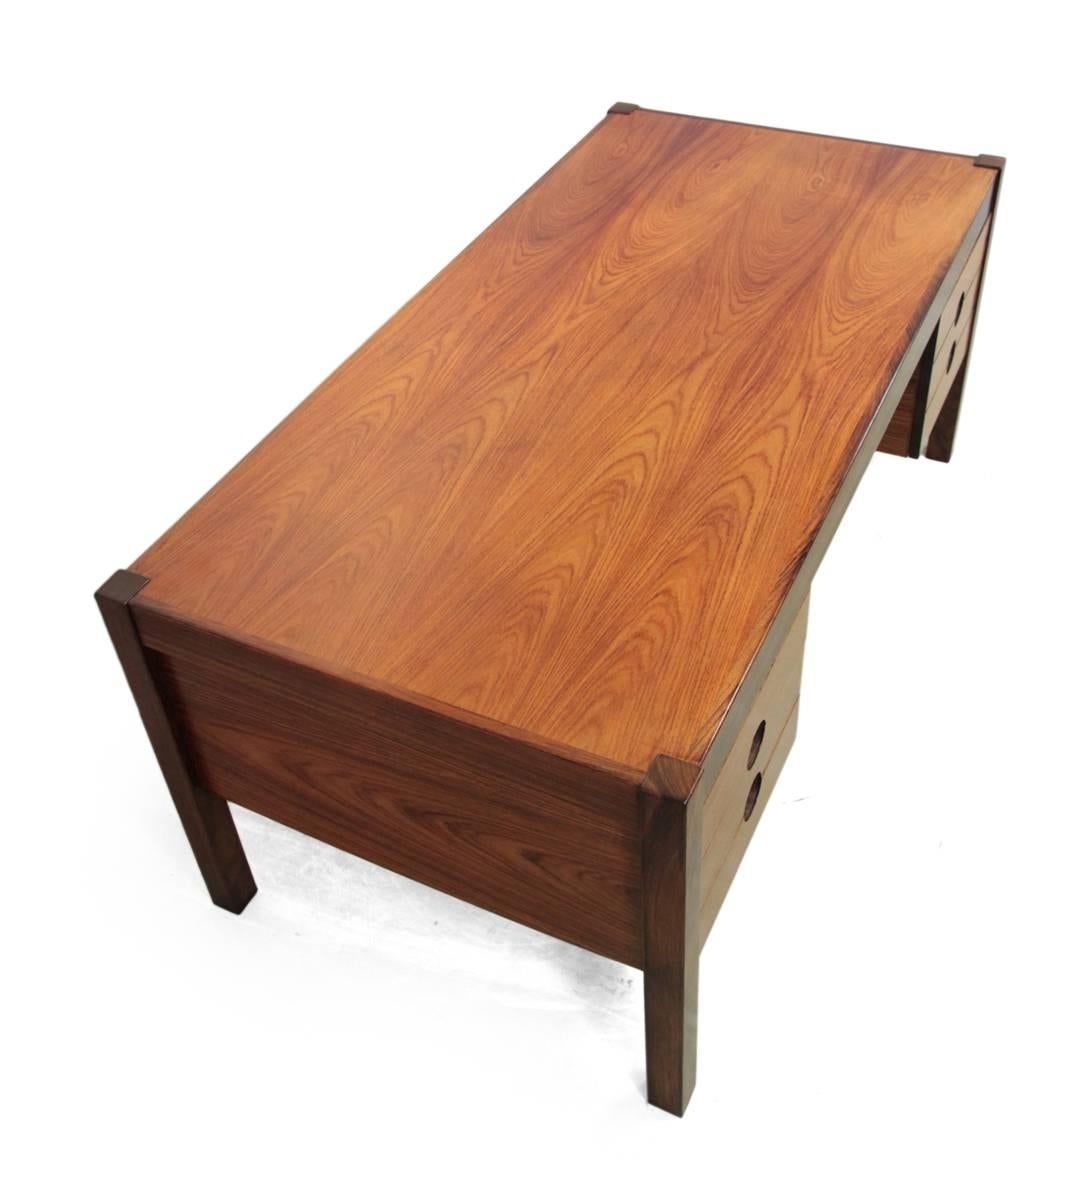 Mid-Century desk by Christian Linneberg.
This desk was designed and produced by Christian Linneberg Denmark in the 1960s. It is made from Indian rosewood and features details on the drawers, which have round sculpted handles. The desk features